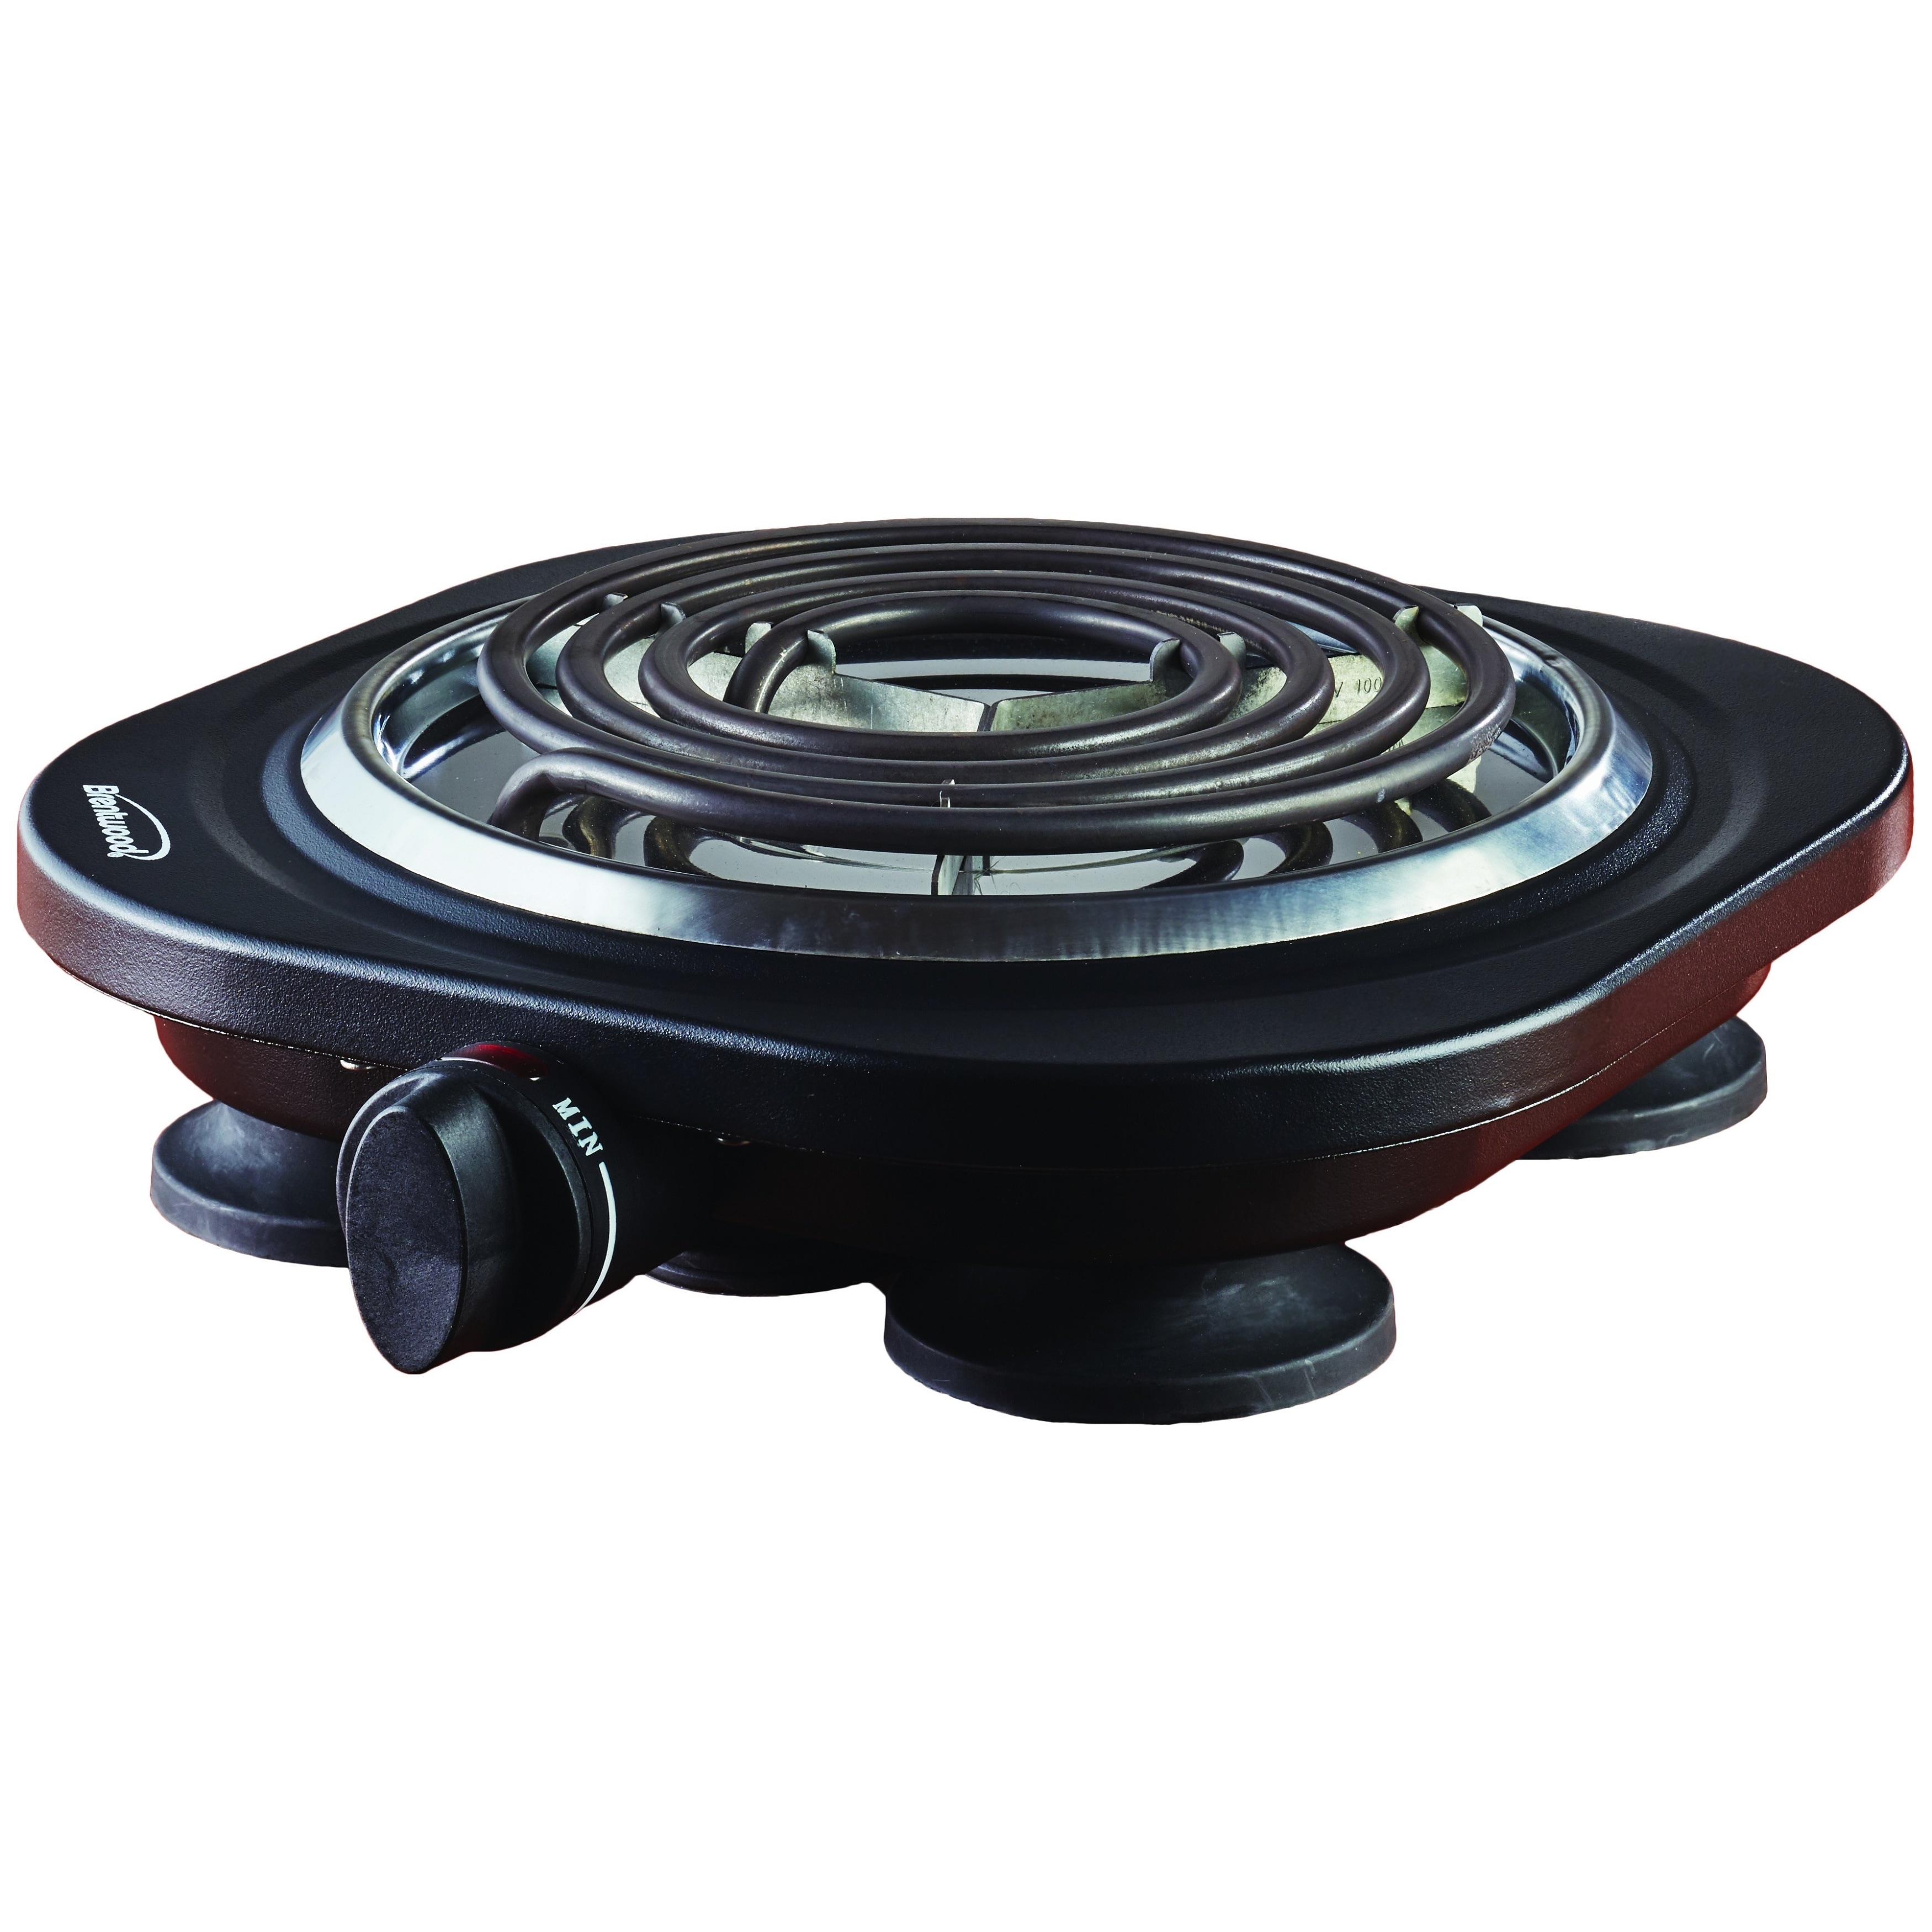 1000W Portable Electric Single Burner Stove for sale online